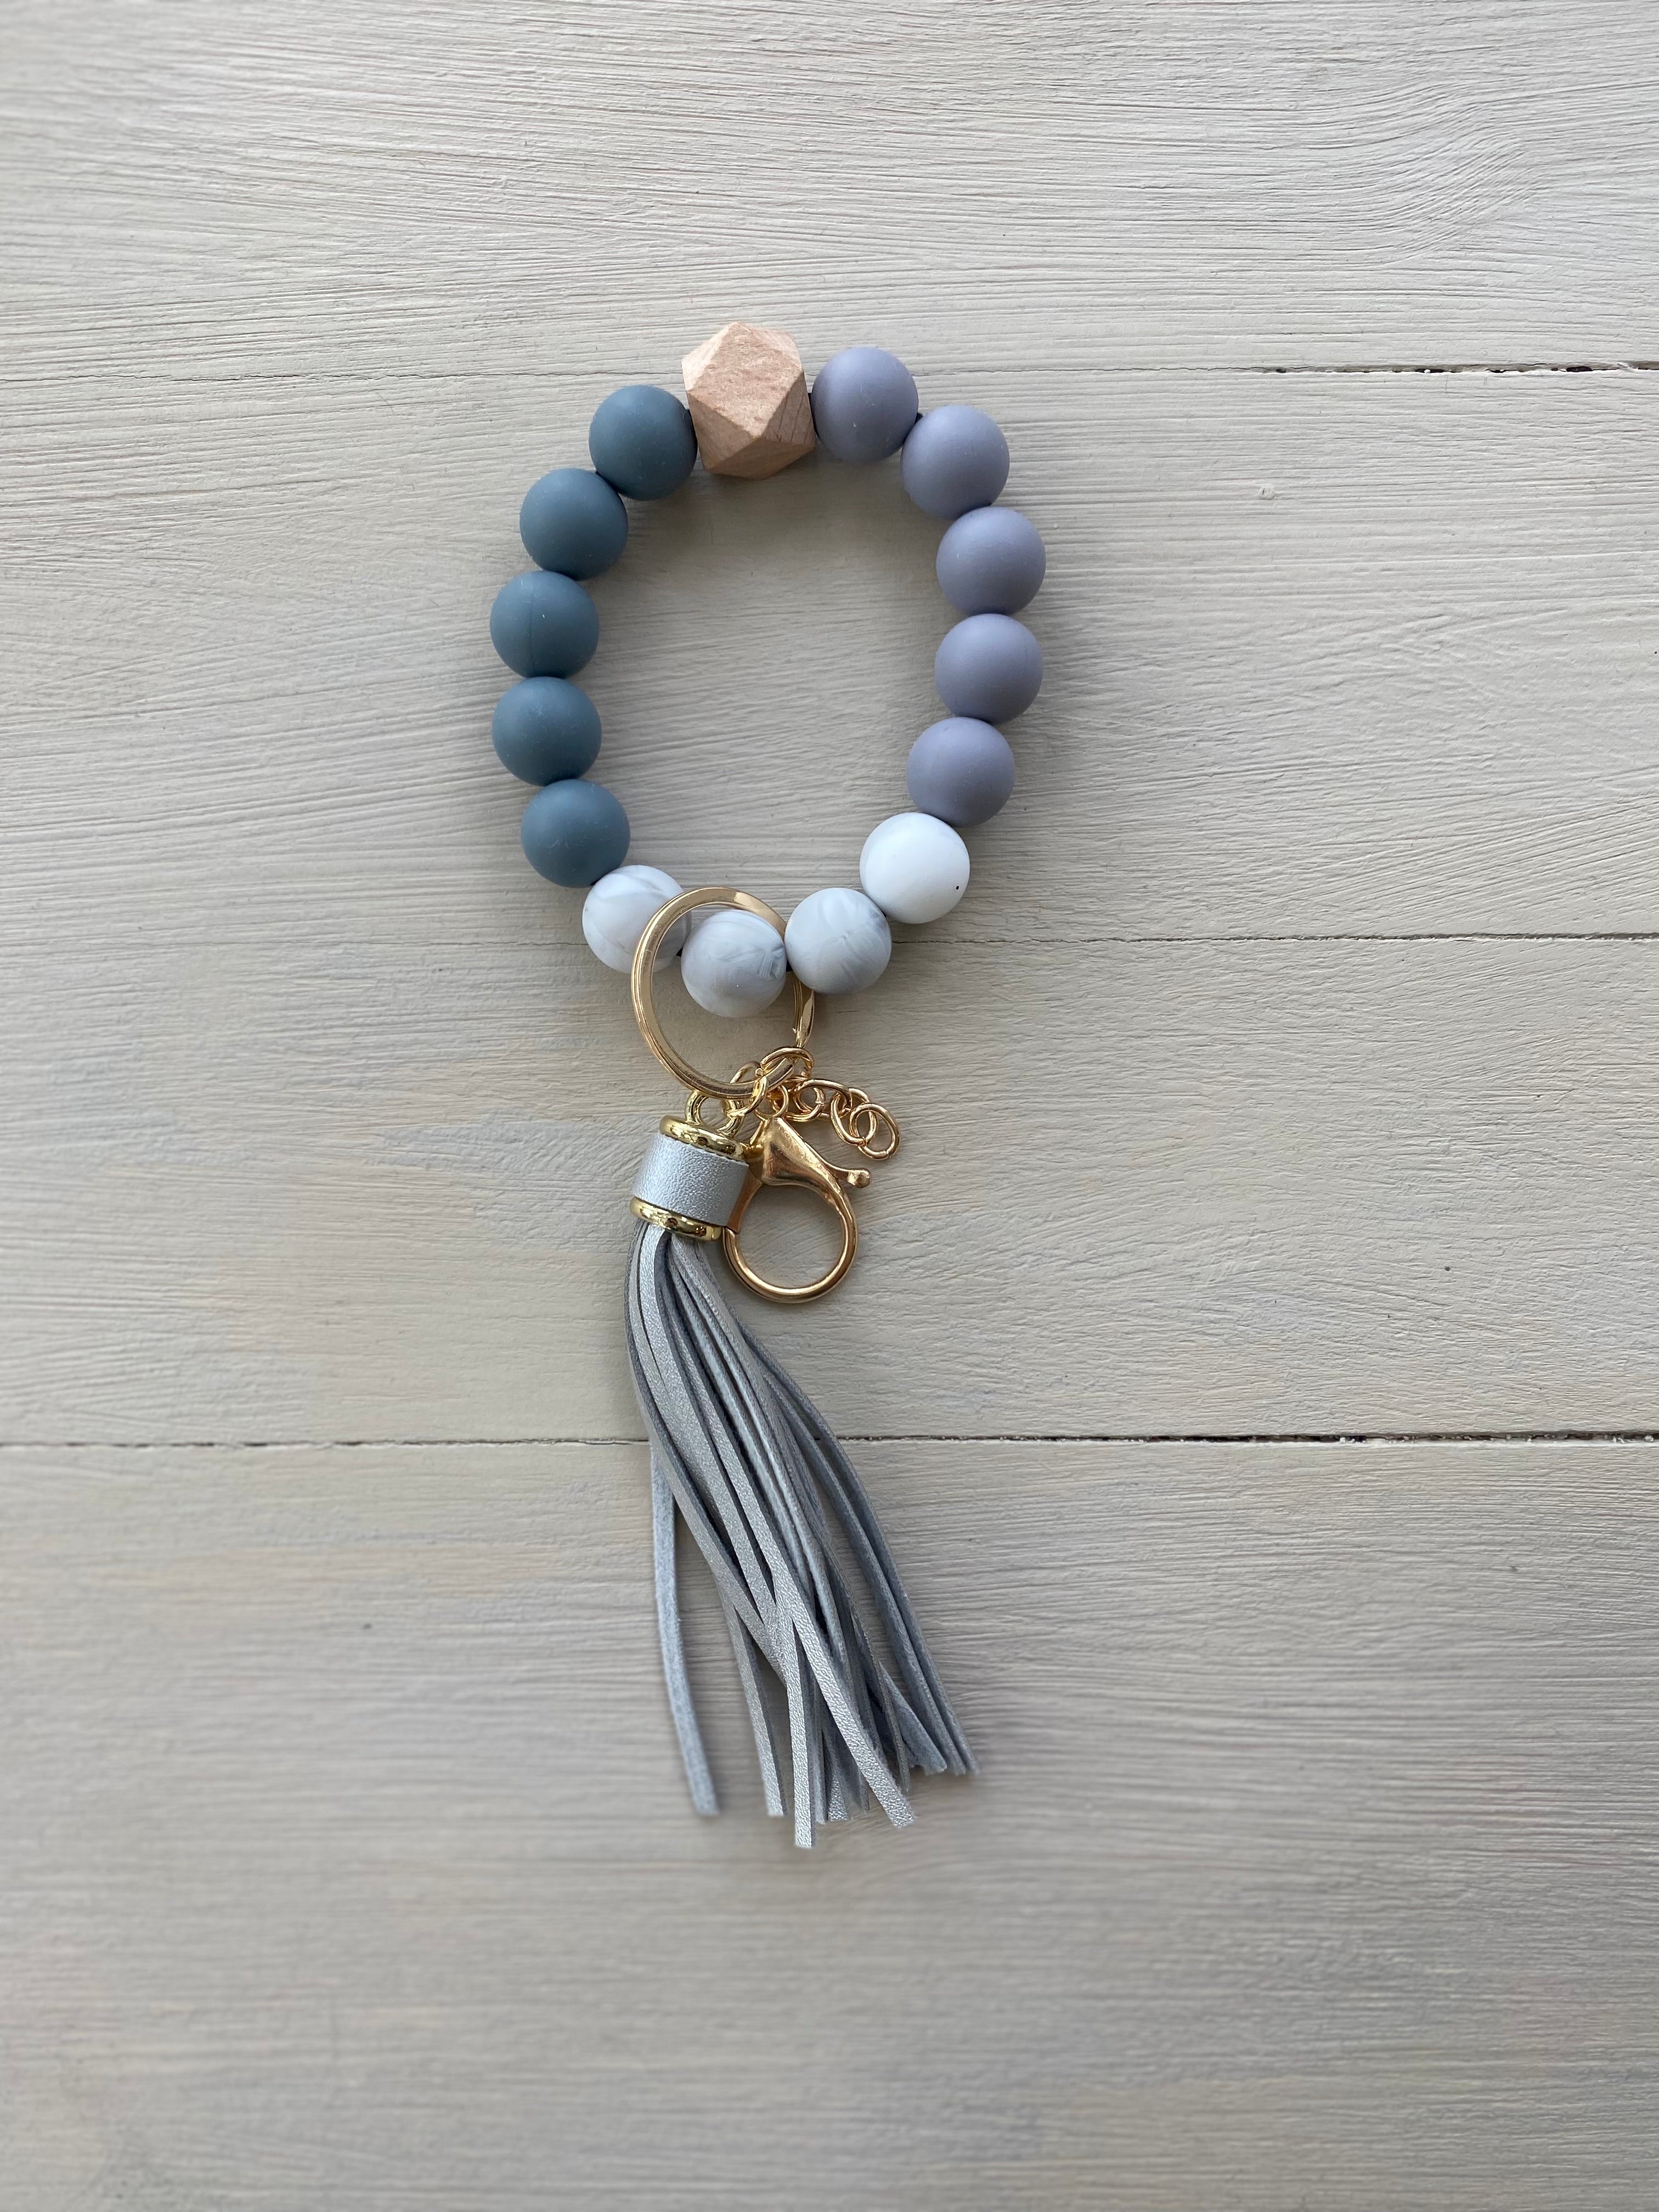 SVF Soft Grey and Grey Marble Silicone Wristlet Beaded Key Chain Bracelet with Tassel and Motivational Engraved Acrylic Charm of choice! (Copy) The Mustard Seed Collection, The Seed